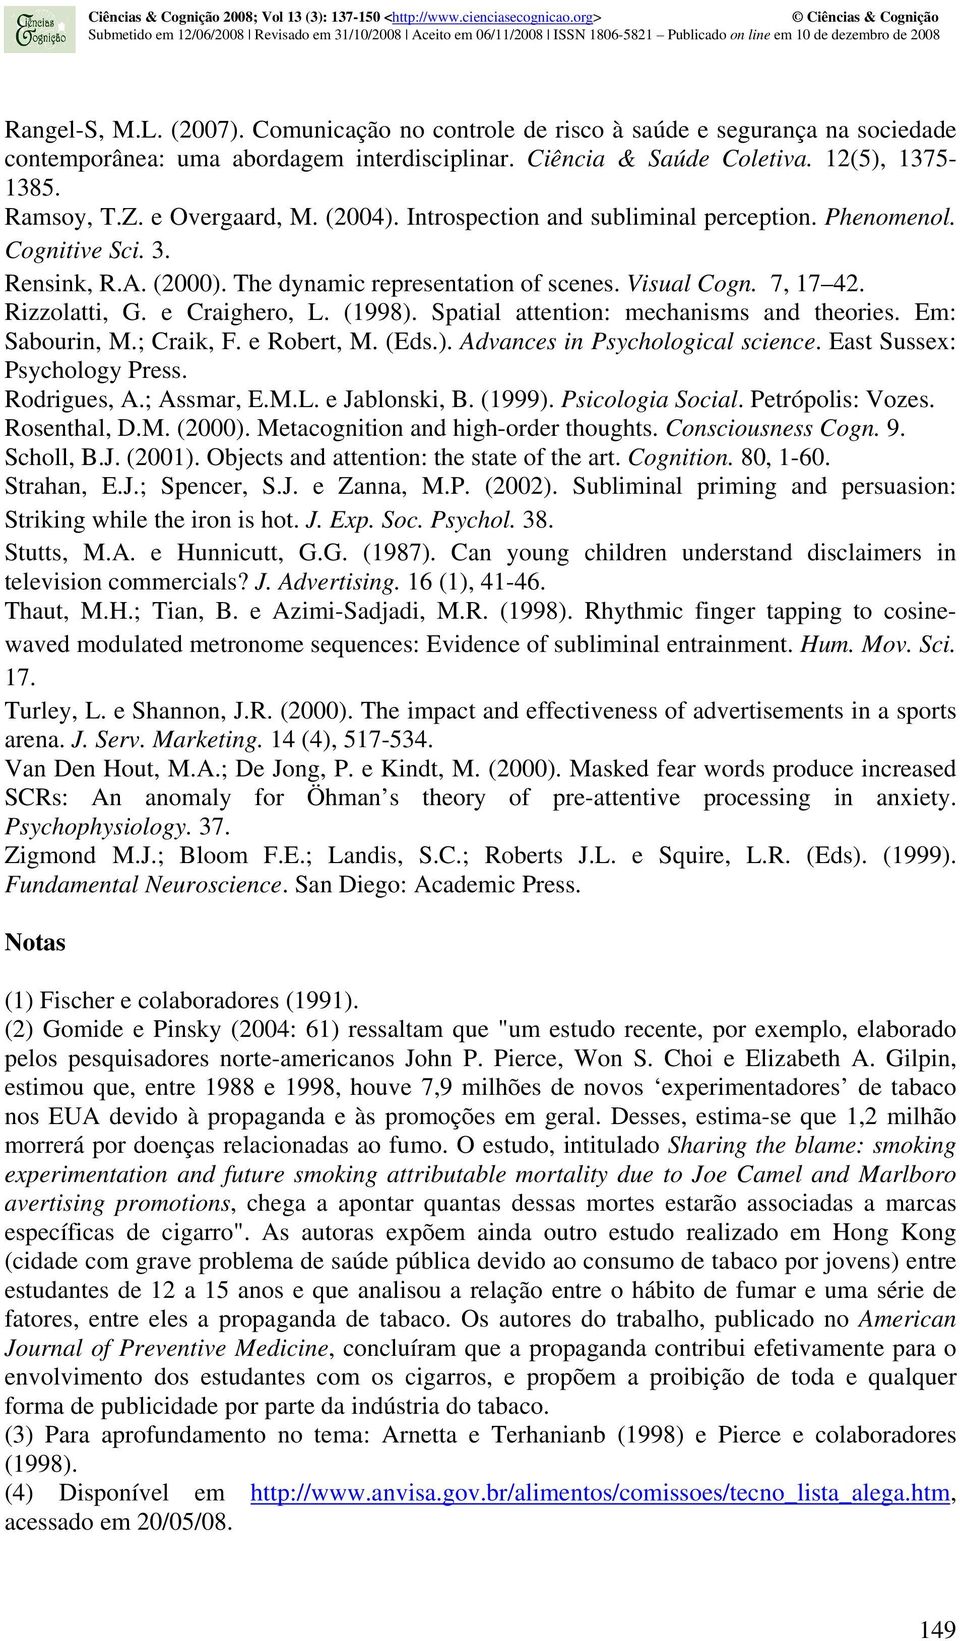 e Craighero, L. (1998). Spatial attention: mechanisms and theories. Em: Sabourin, M.; Craik, F. e Robert, M. (Eds.). Advances in Psychological science. East Sussex: Psychology Press. Rodrigues, A.